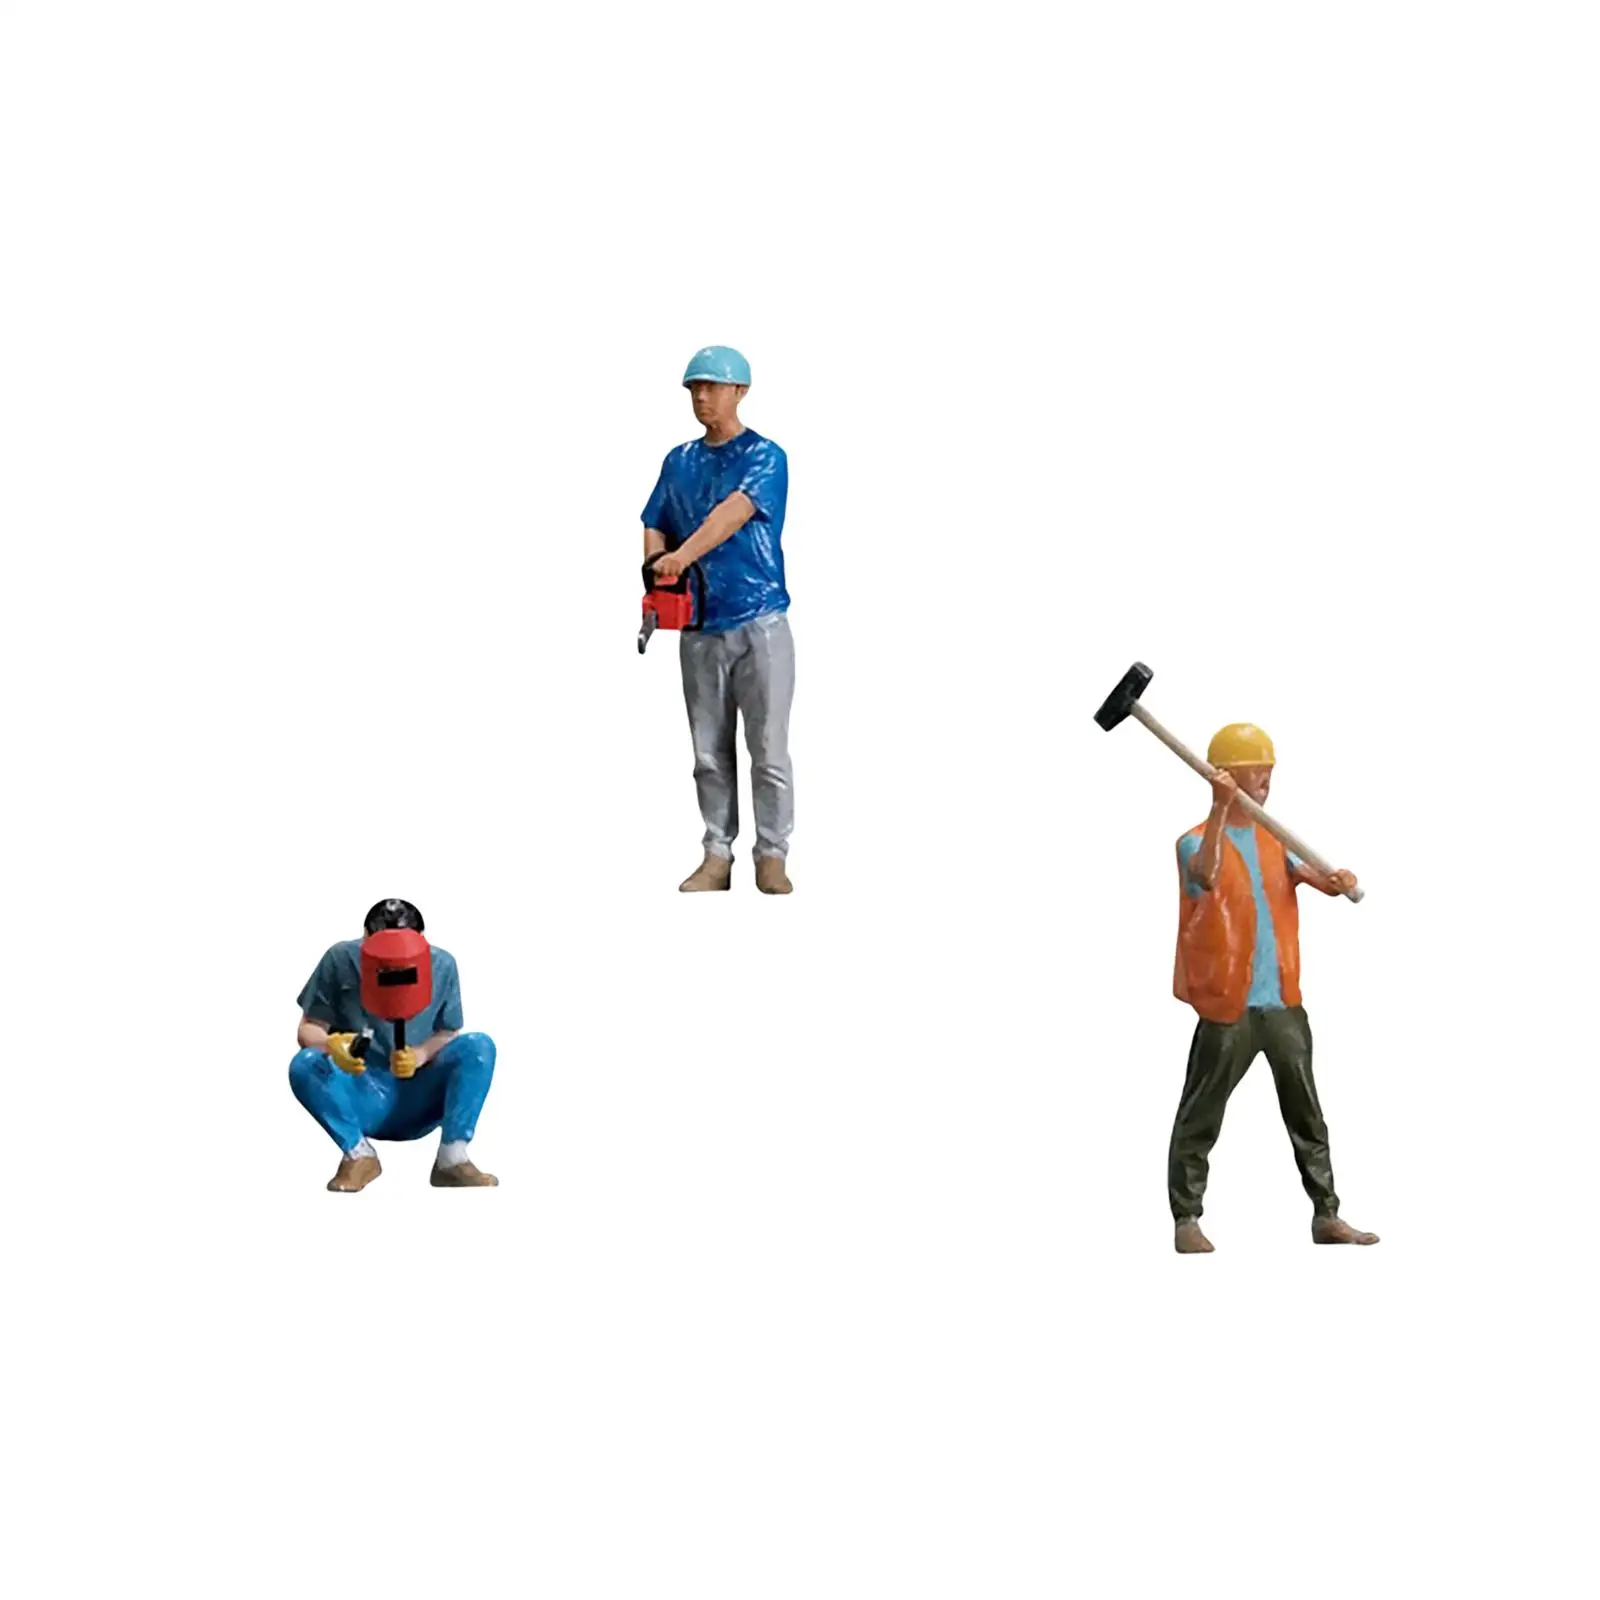 1: 32 Micro Landscape Laborers Figurines Model Resin DIY Craft Projects Waterproof for Playhouses, Studio Scenes, Tabletop Decor